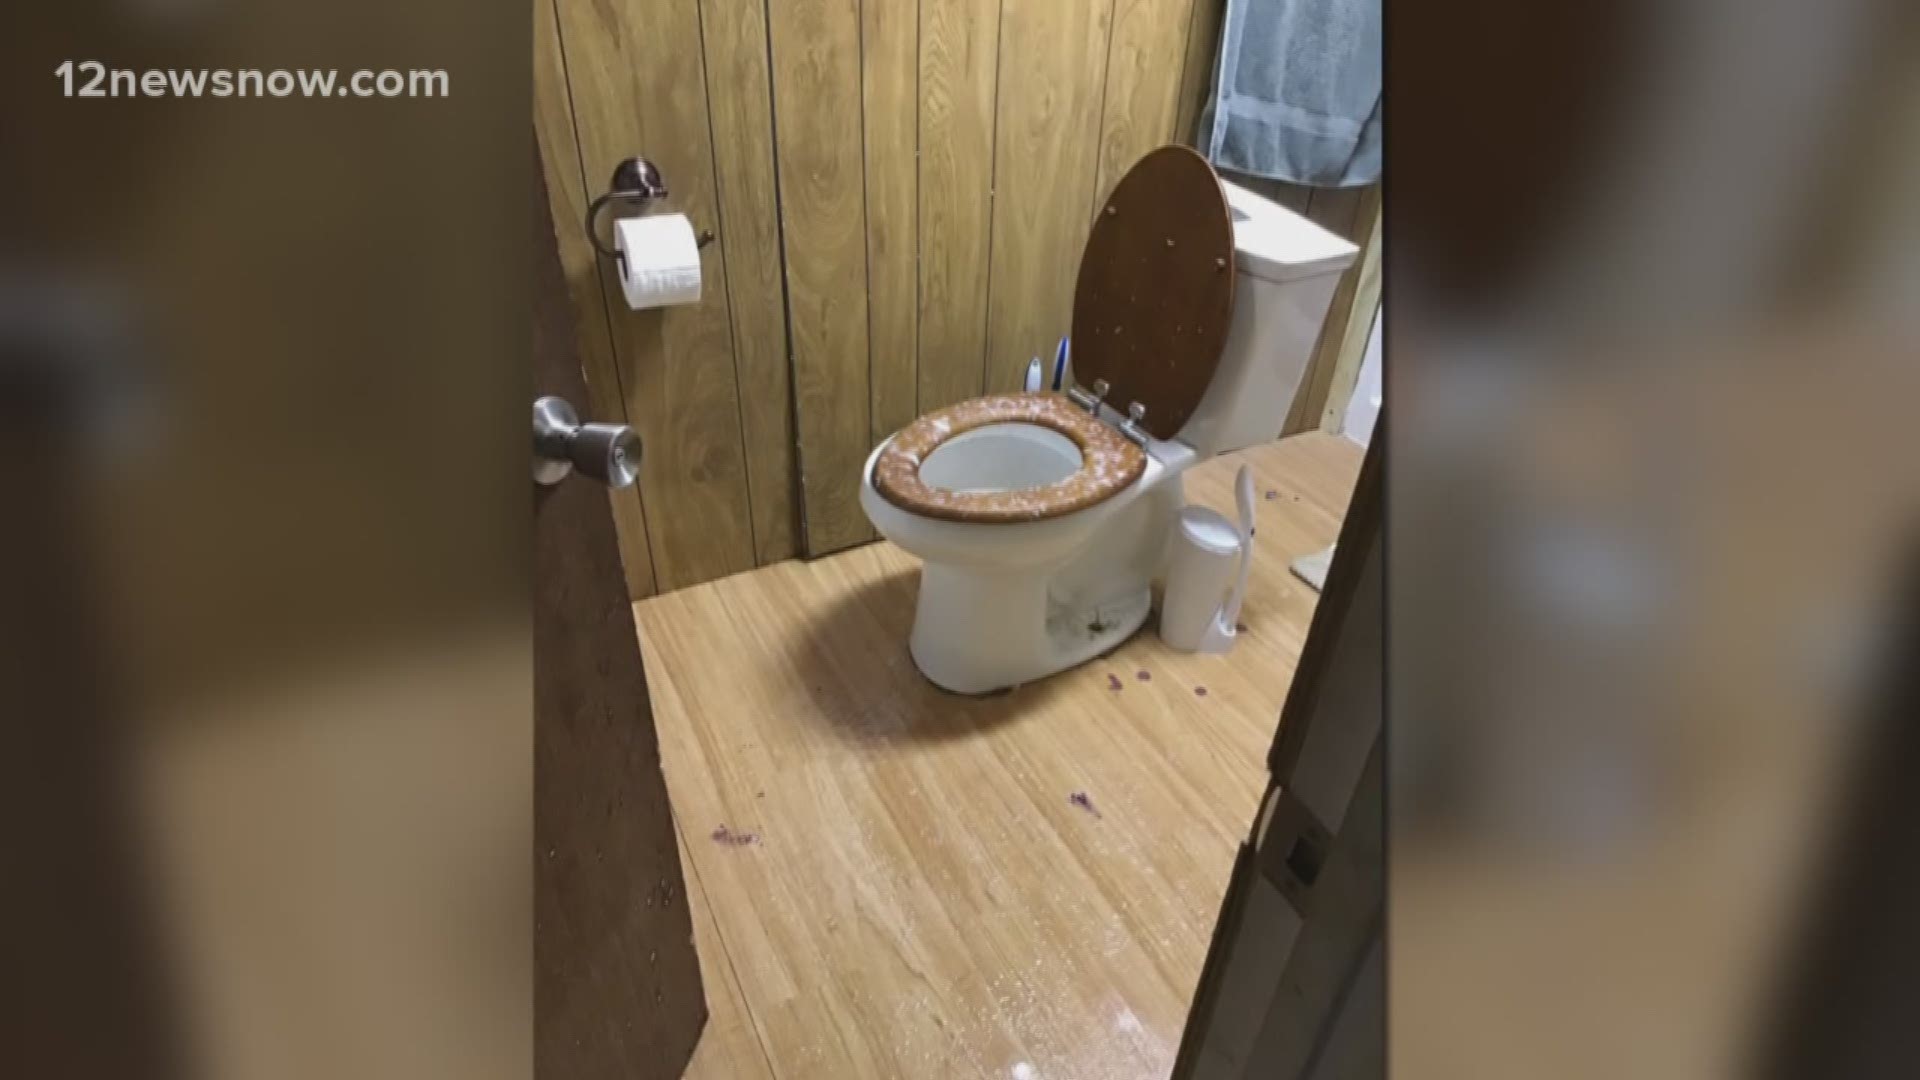 The water came from the toilet twice in the family's home.